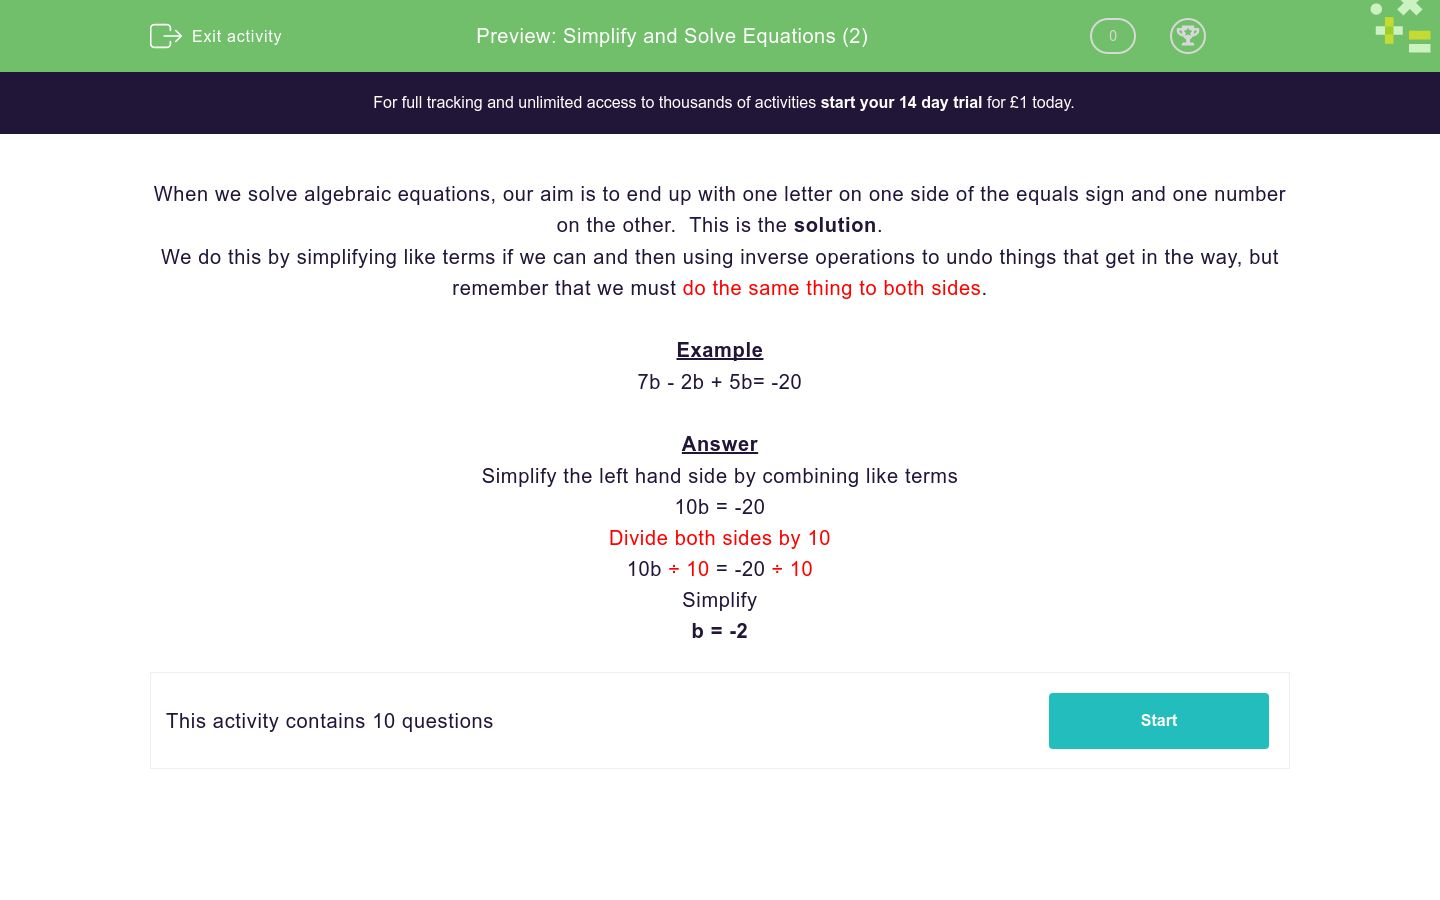 Simplify and Solve Equations (2) Worksheet - EdPlace